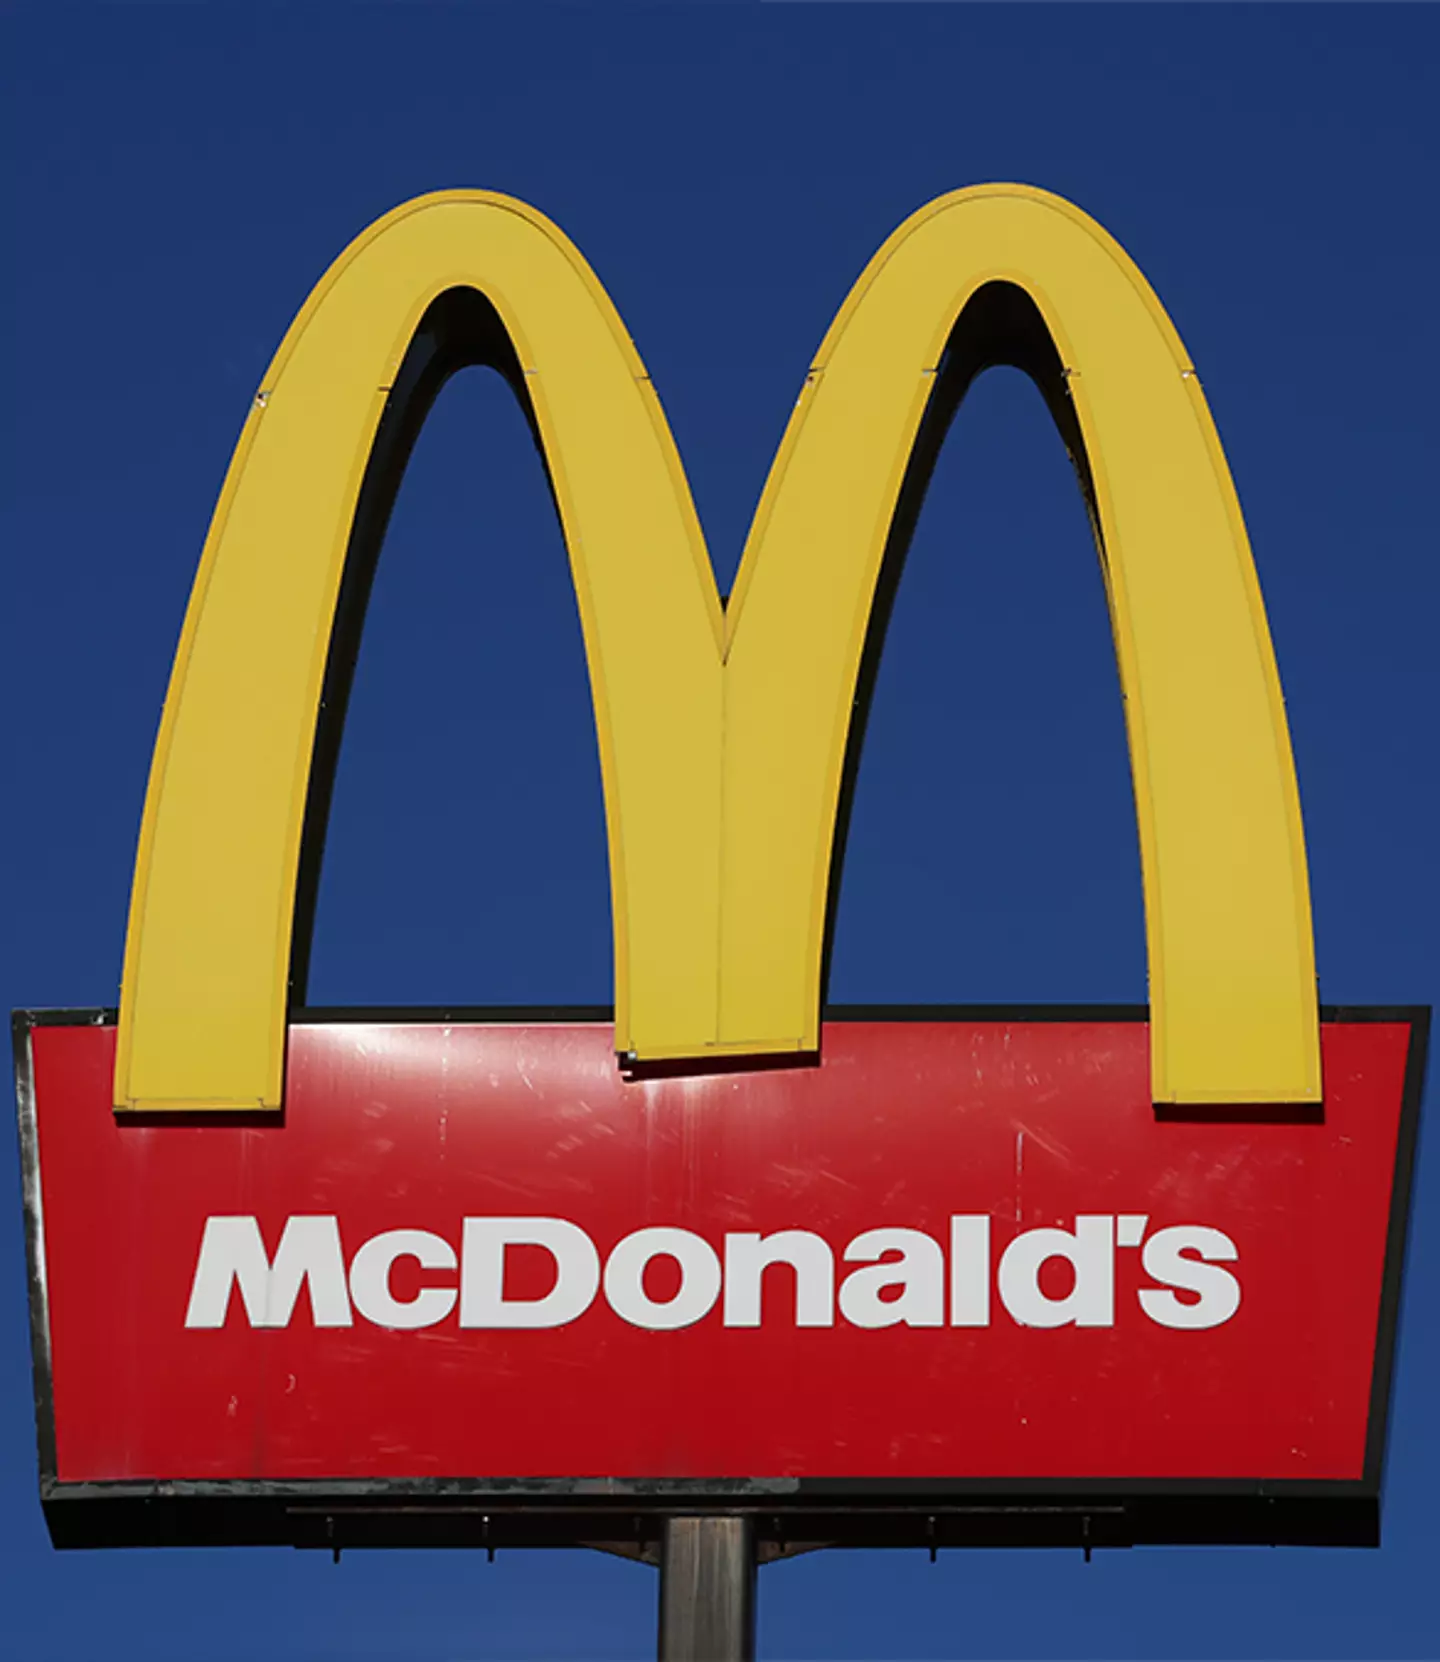 McDonald's respond to the negative surveys by offering free meals /Nathan Stirk /Contributor/Getty